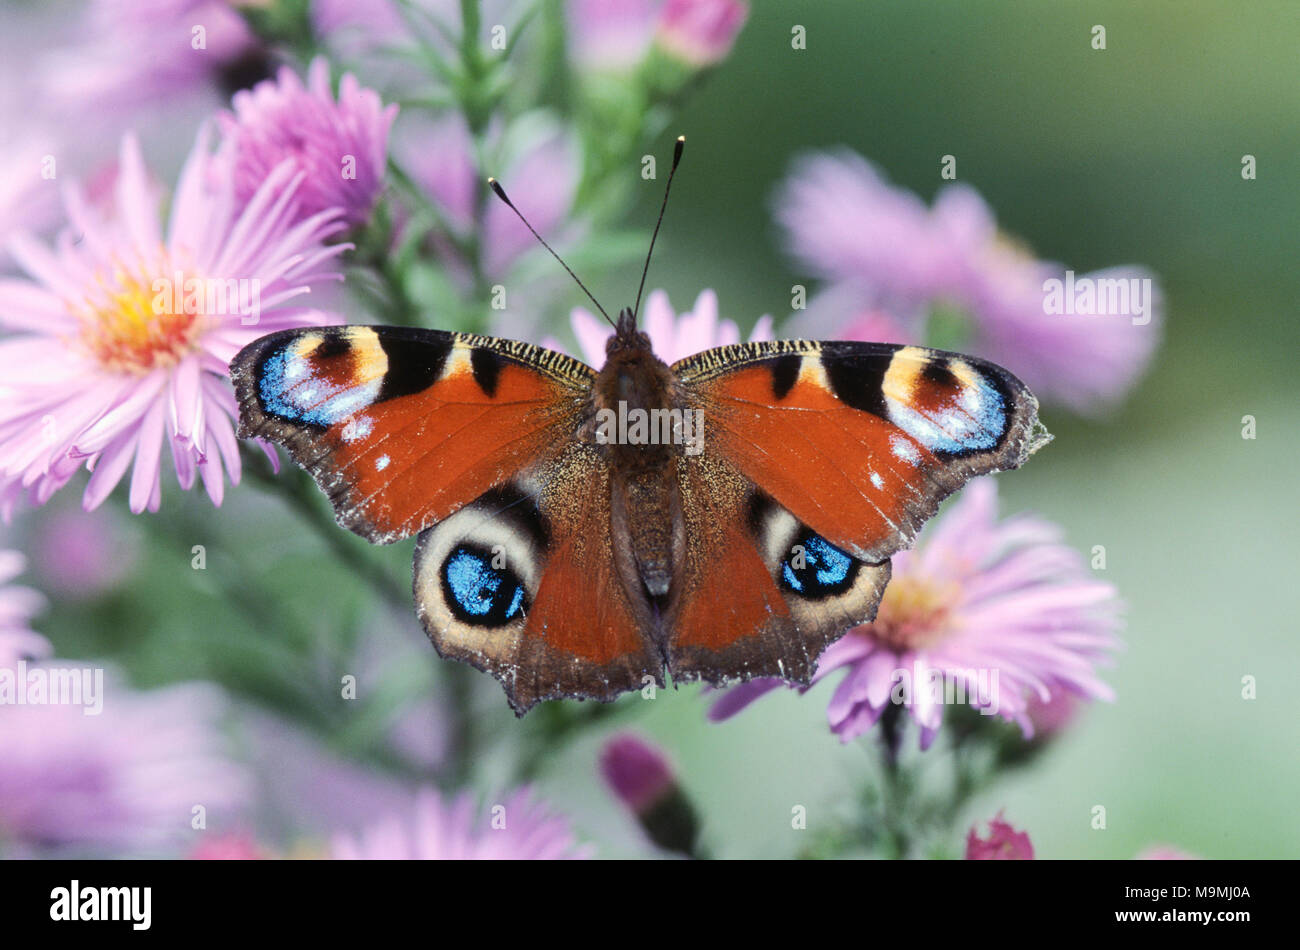 European Peacock Butterfly (Aglais io). Butterfly on Aster flowers. Germany Stock Photo